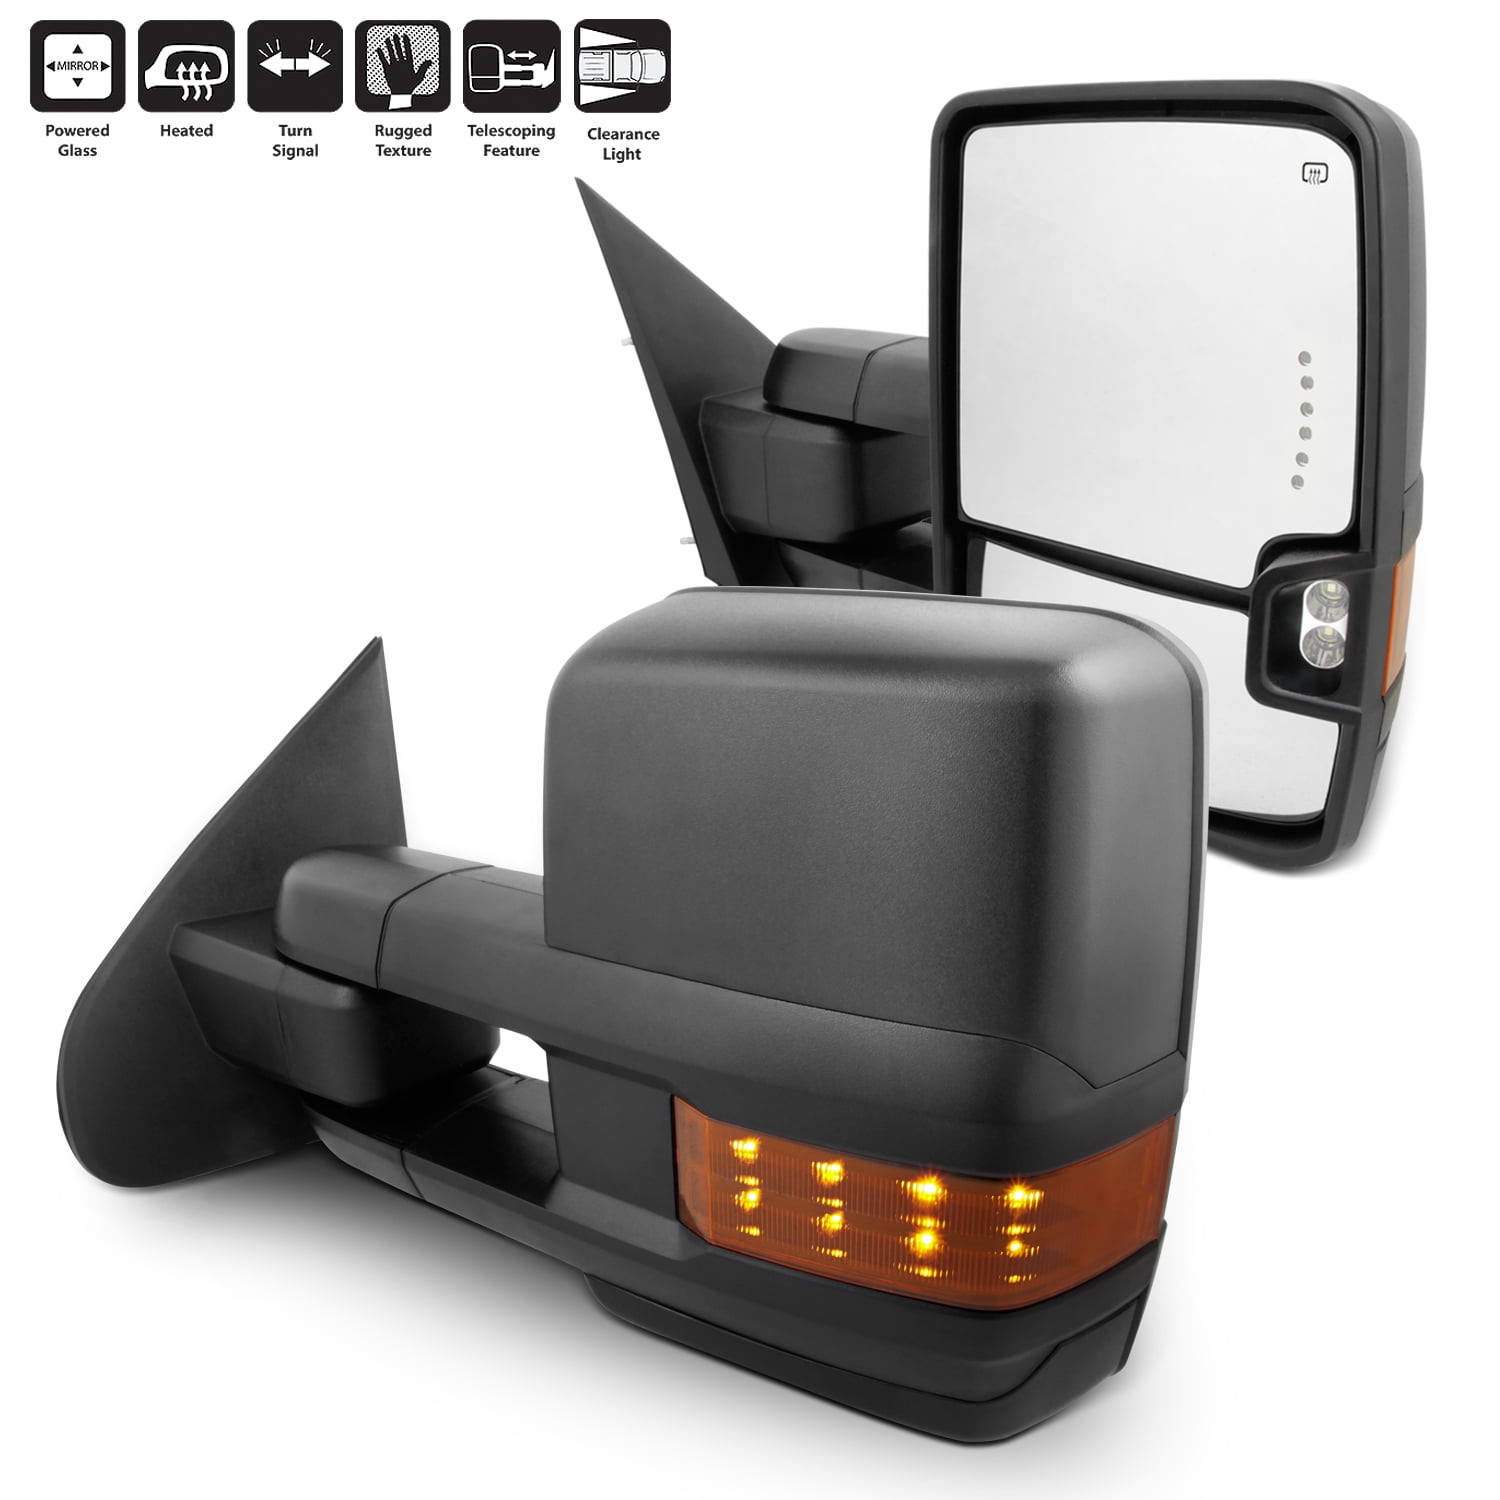 Sequential Turn Signal Side Black Towing Mirrors For 07-13 Silverado Sierra Pair of Powered Heated Glass 